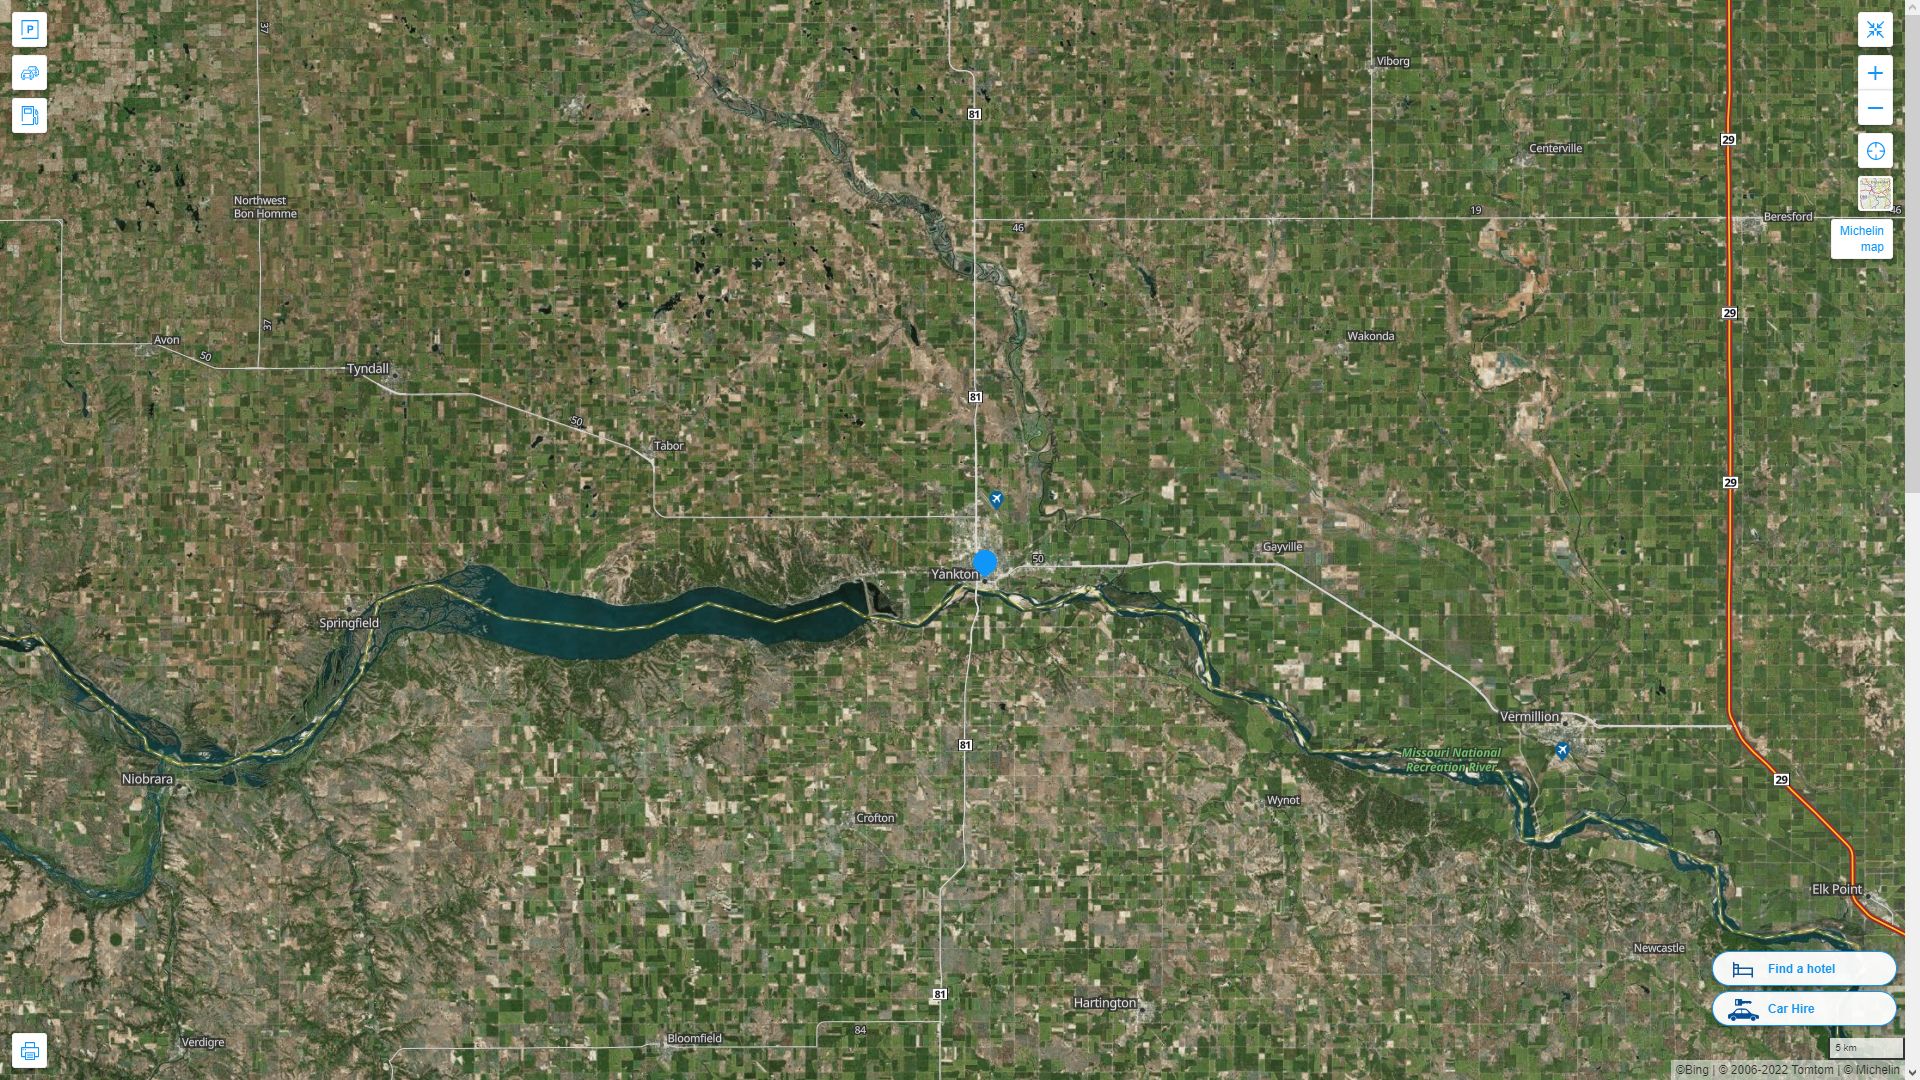 Yankton South Dakota Highway and Road Map with Satellite View